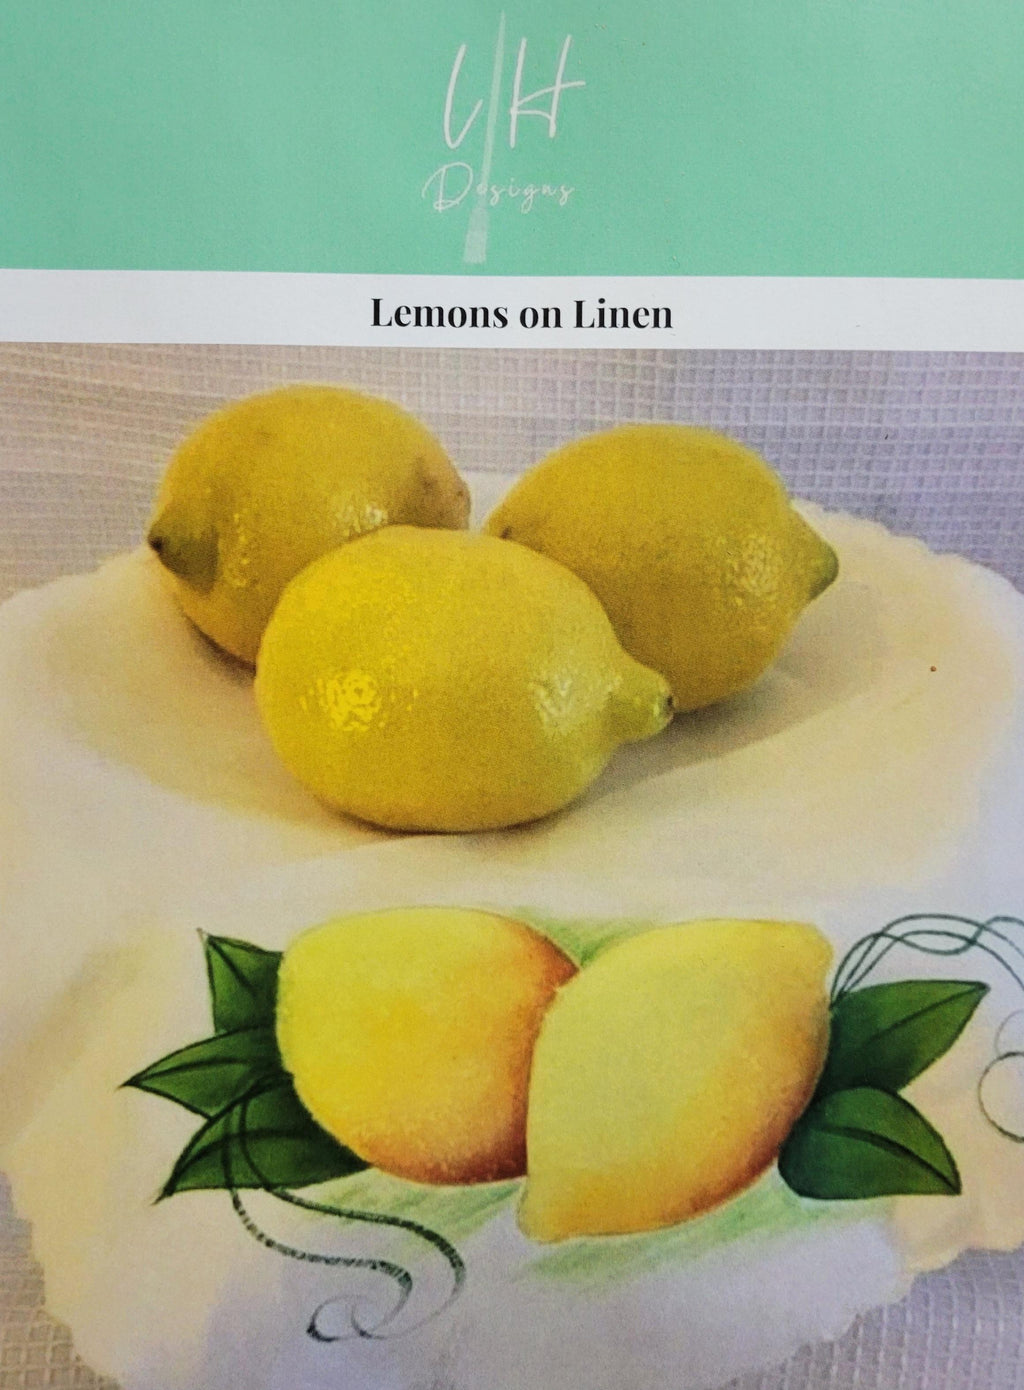 Lemons on Linen packet by Lora Haberstroh